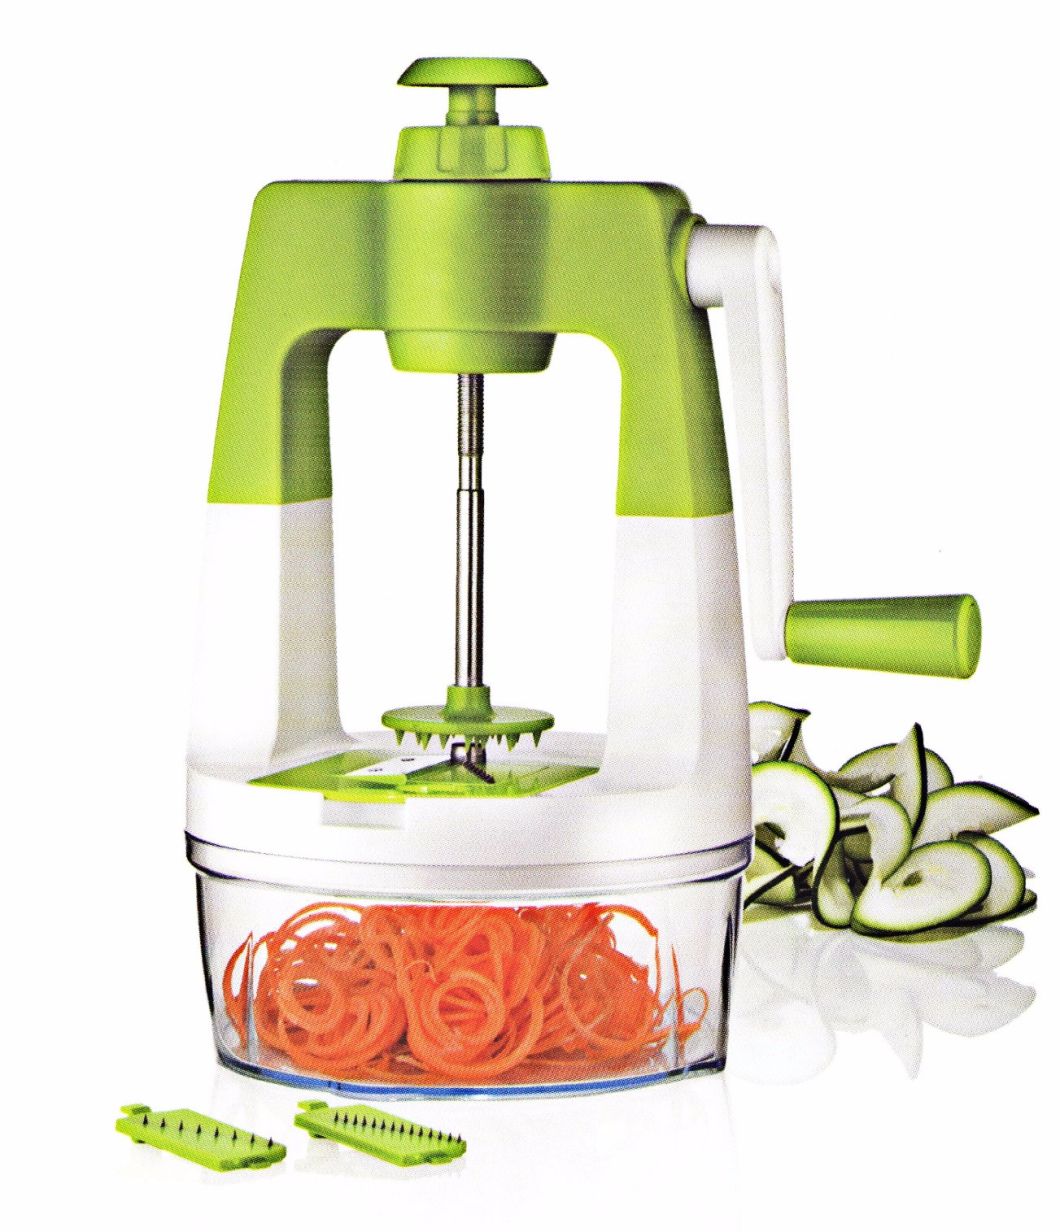 3 in 1 Home Appliance Plastic Food Processor Vegetable Chopper Strappy Cutting Machine Cg027